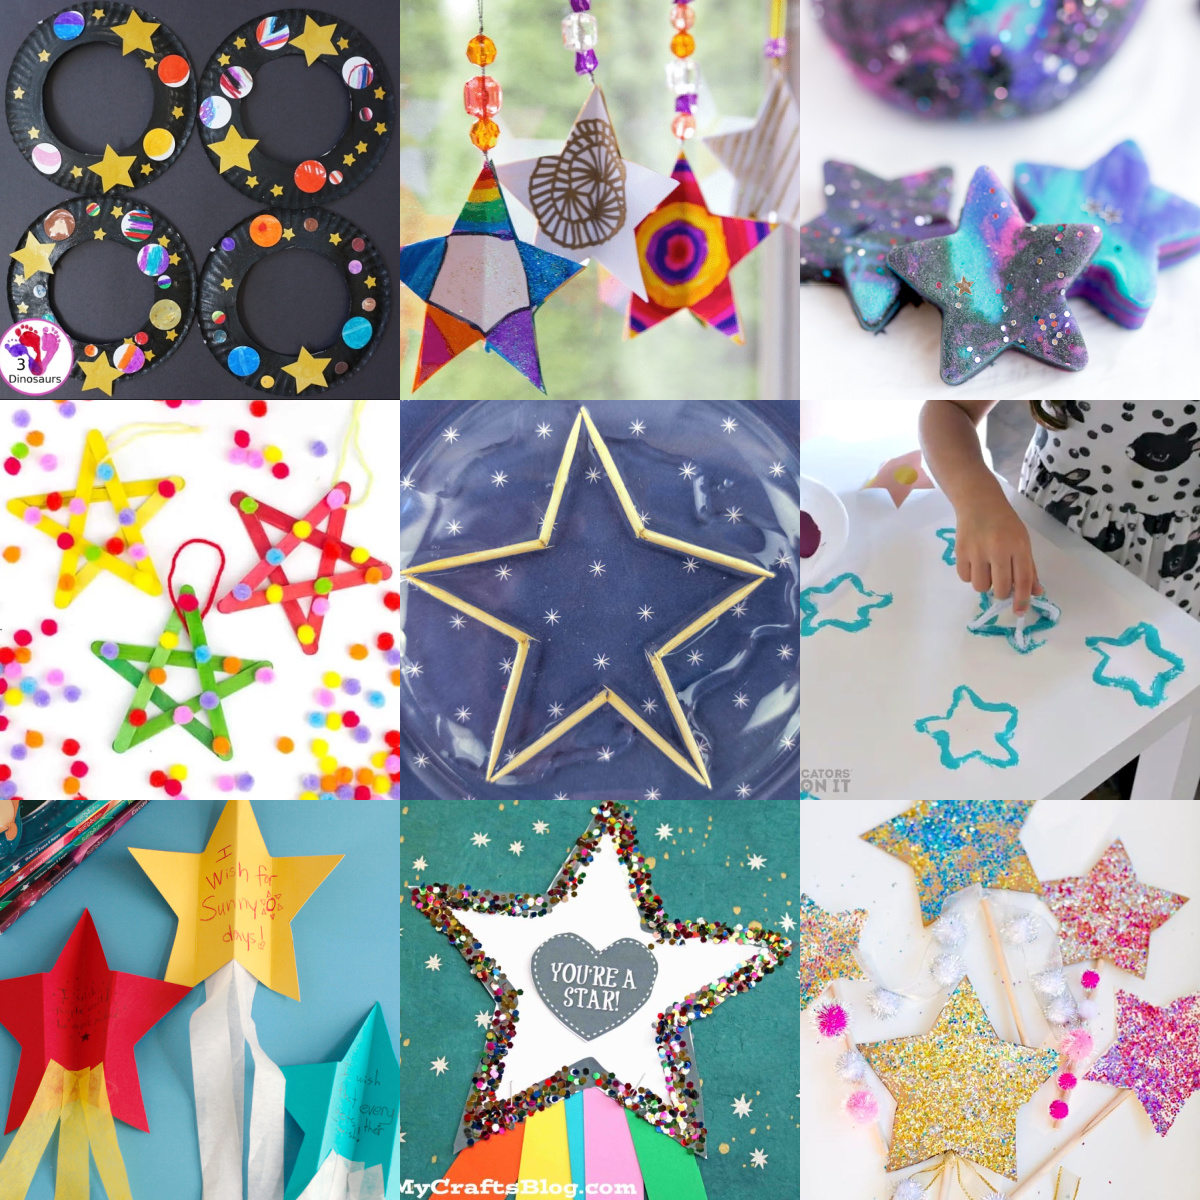 Glitter Crafts - 34 Sparkly DIY Ideas You'll Love - DIY Projects